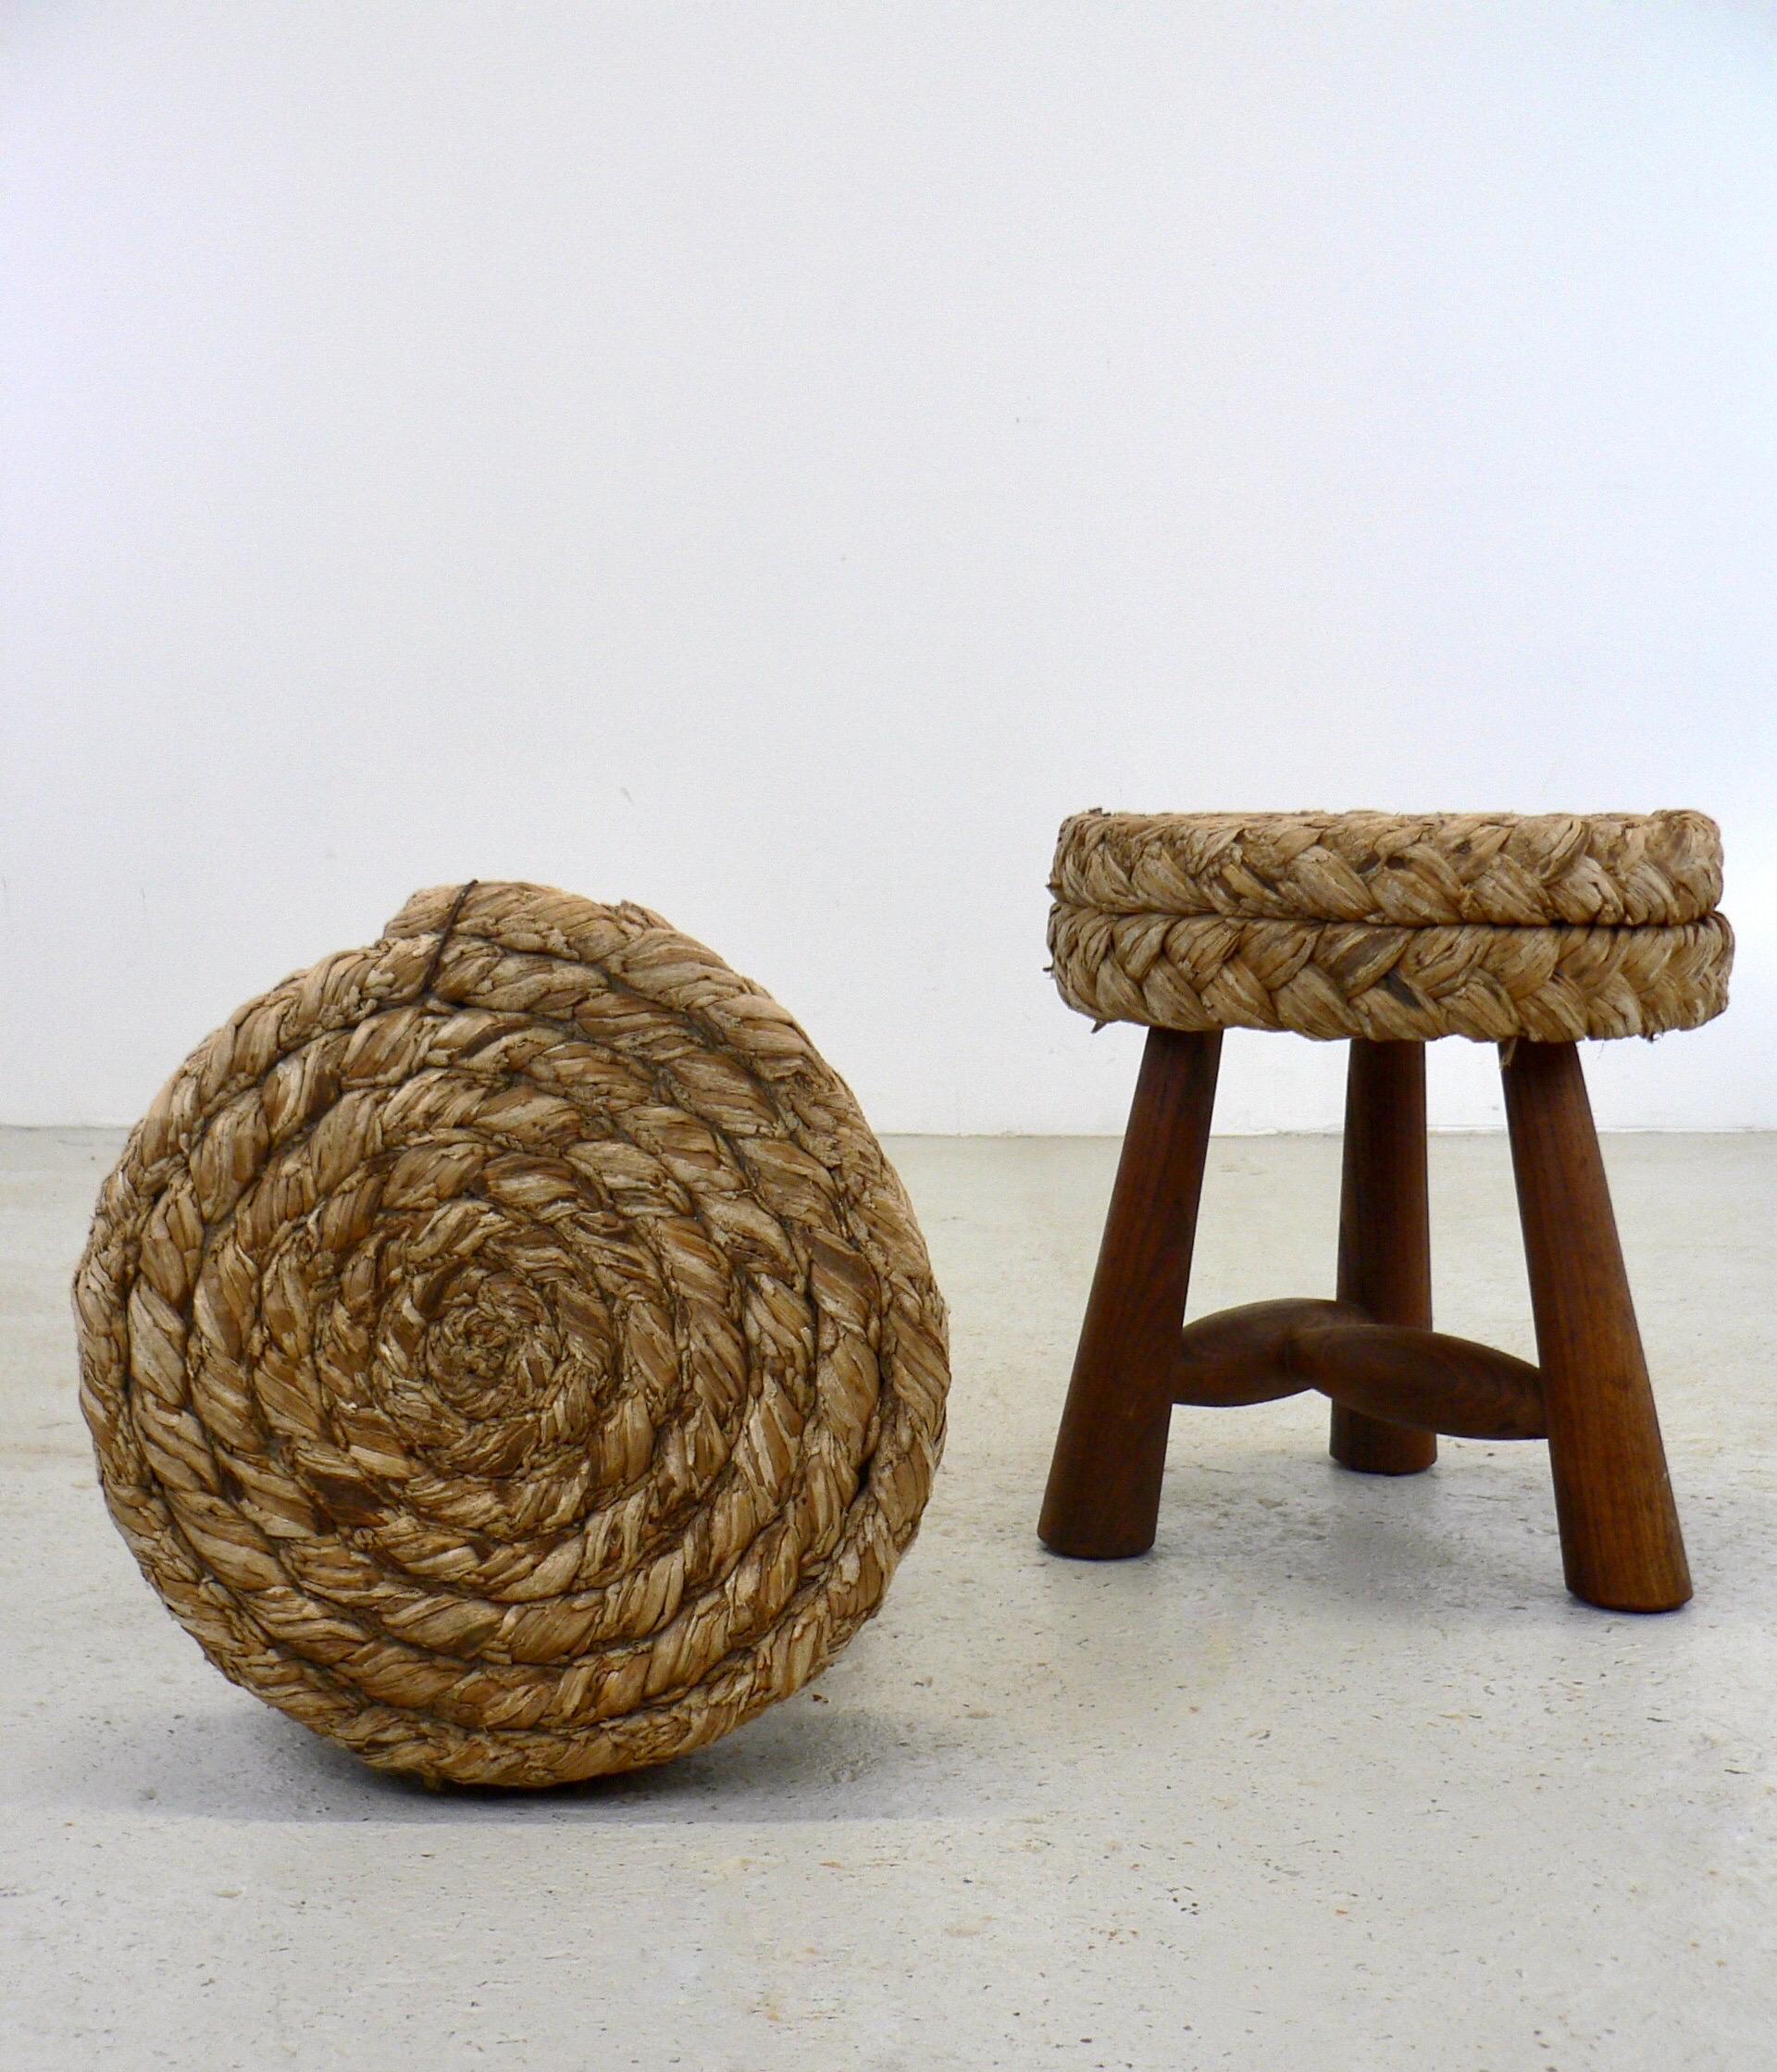 Raffia Set of 2 stools designed by Adrien Audoux and Frida Minet - France -1950 For Sale